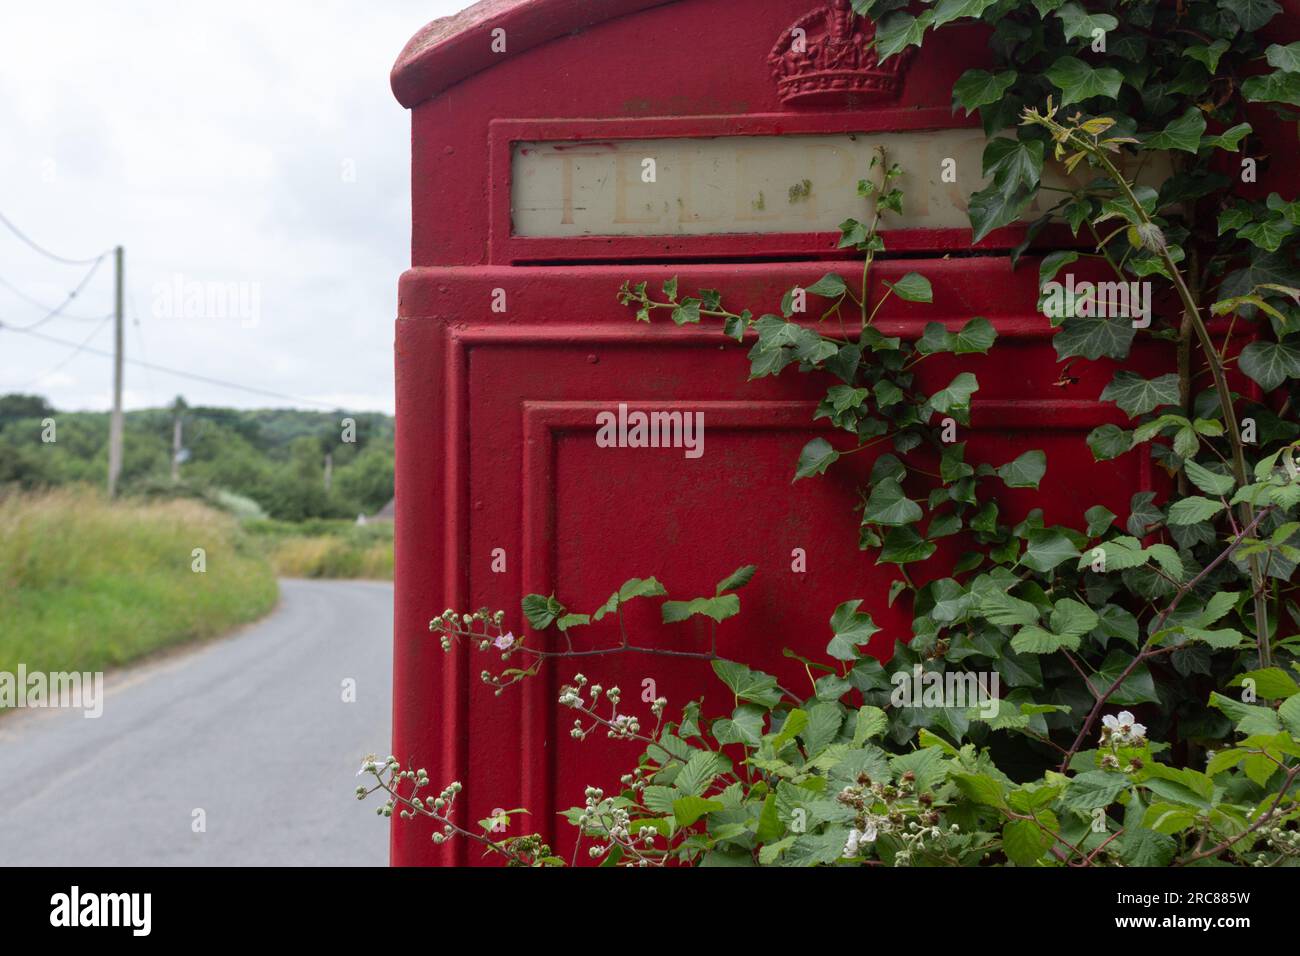 Detail of an old K6 type red phone box on a country lane with ivy climbing over it, suggesting the decline of public services Stock Photo